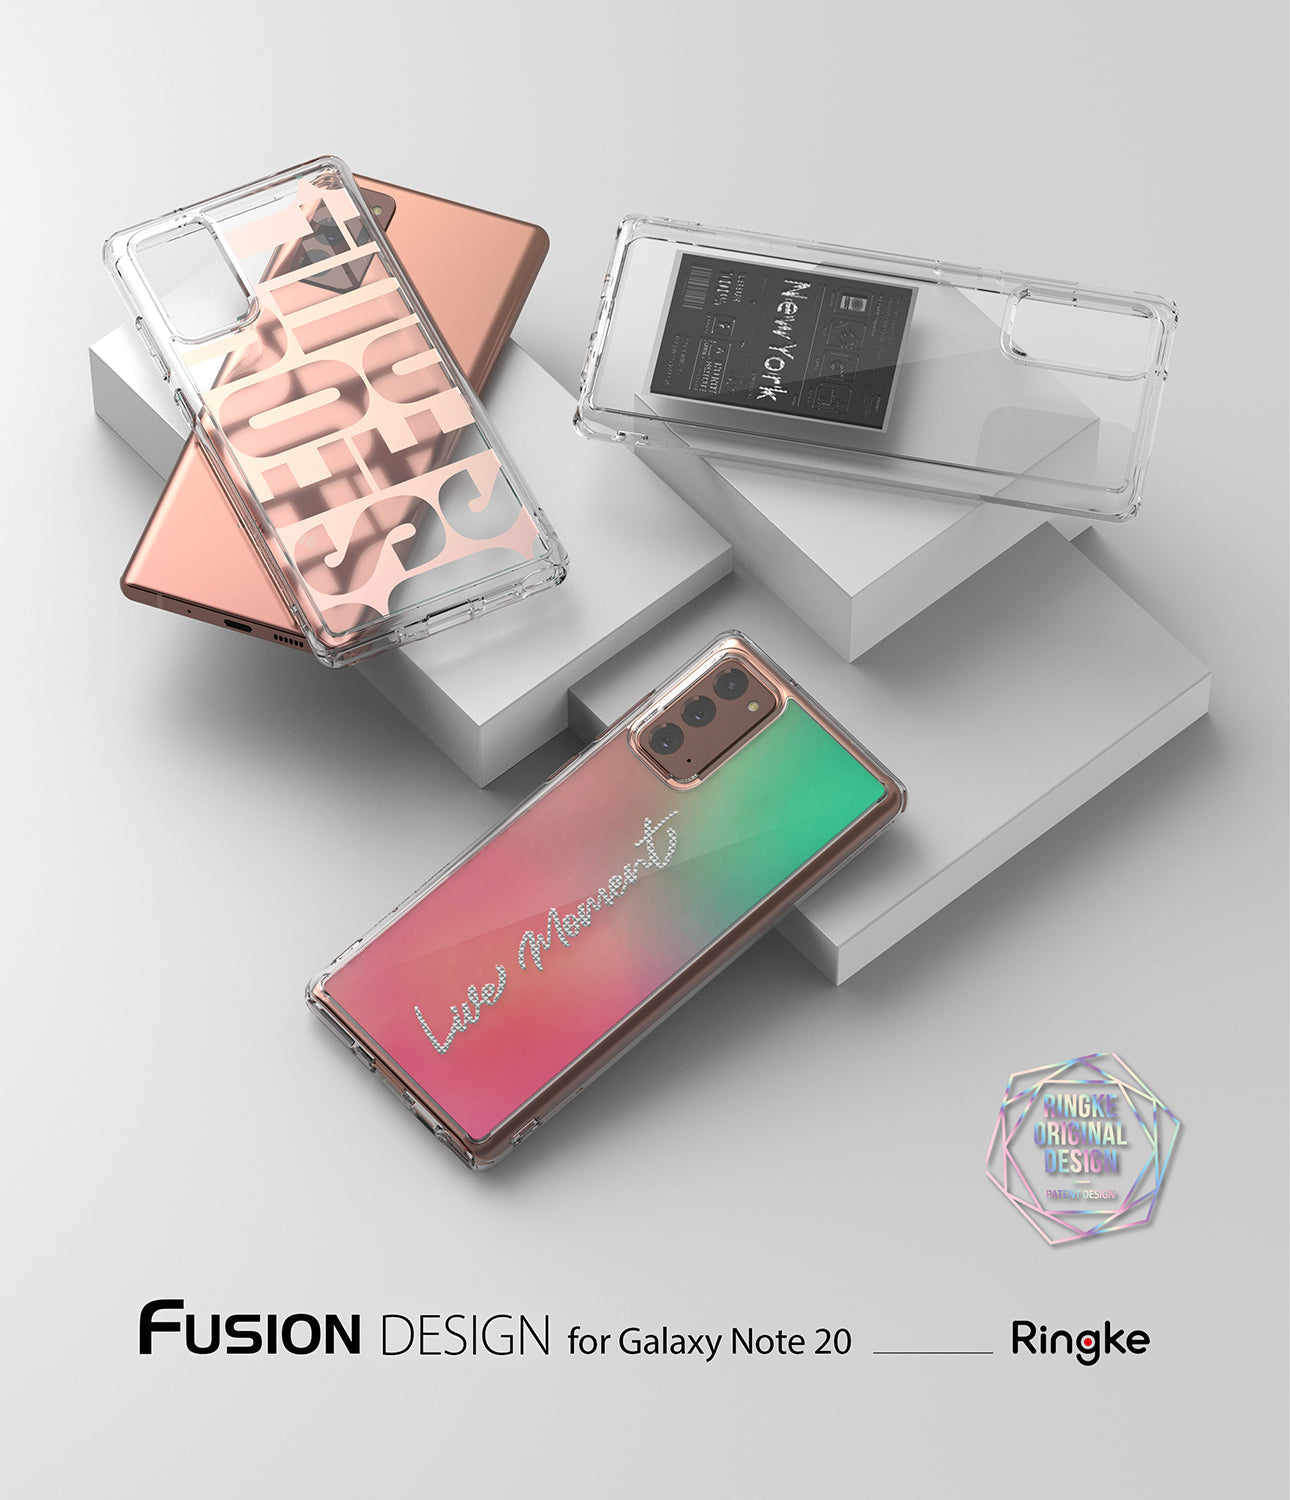 Galaxy Note 20 Case | Fusion Design 02. Live Moment - Ringke Official Store